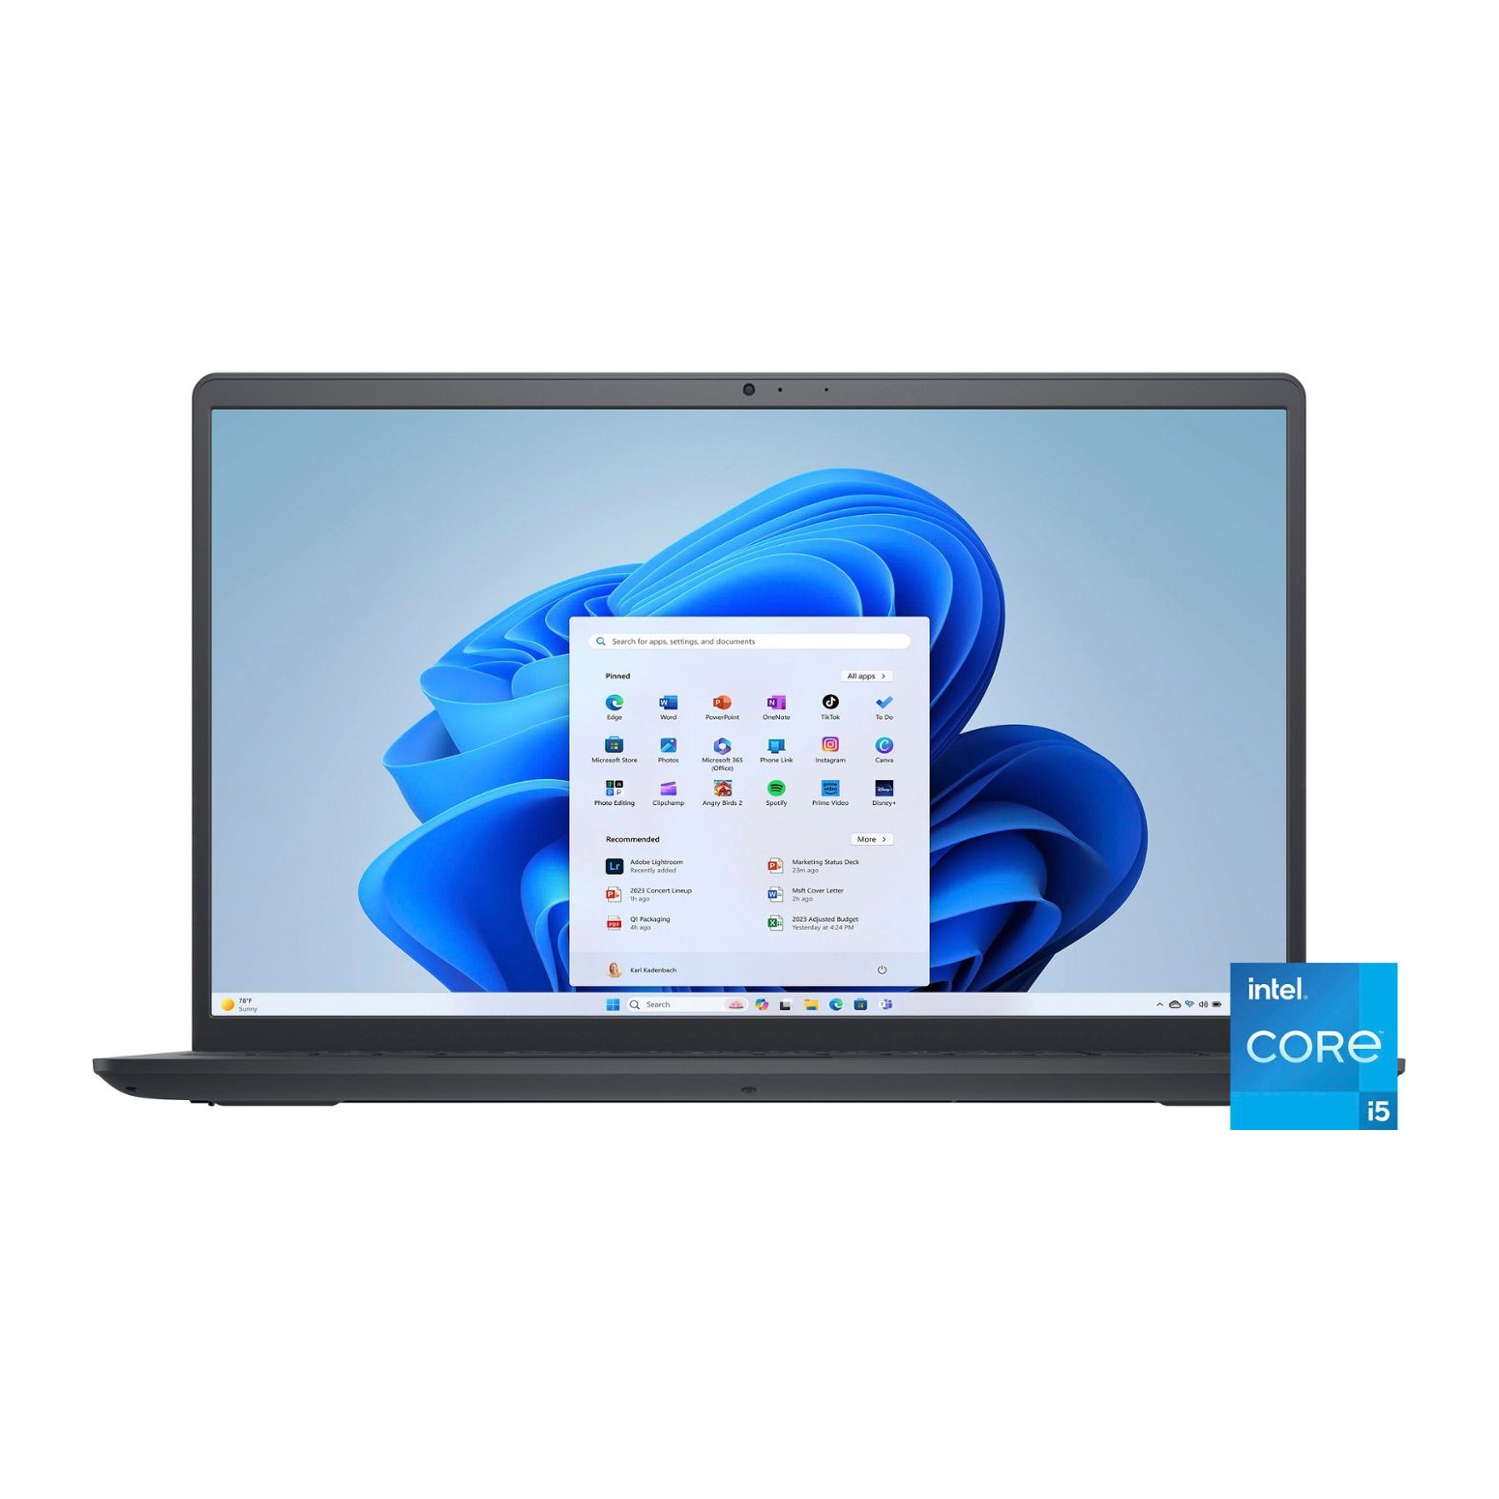 Dell - Inspiron 15.6" 3520 FHD 1920 x 1080 Touch Screen Laptop - Intel Core i5 - 8GB Memory - 1TB SSD PCIE - Carbon Black - Windows 11 Home S mode